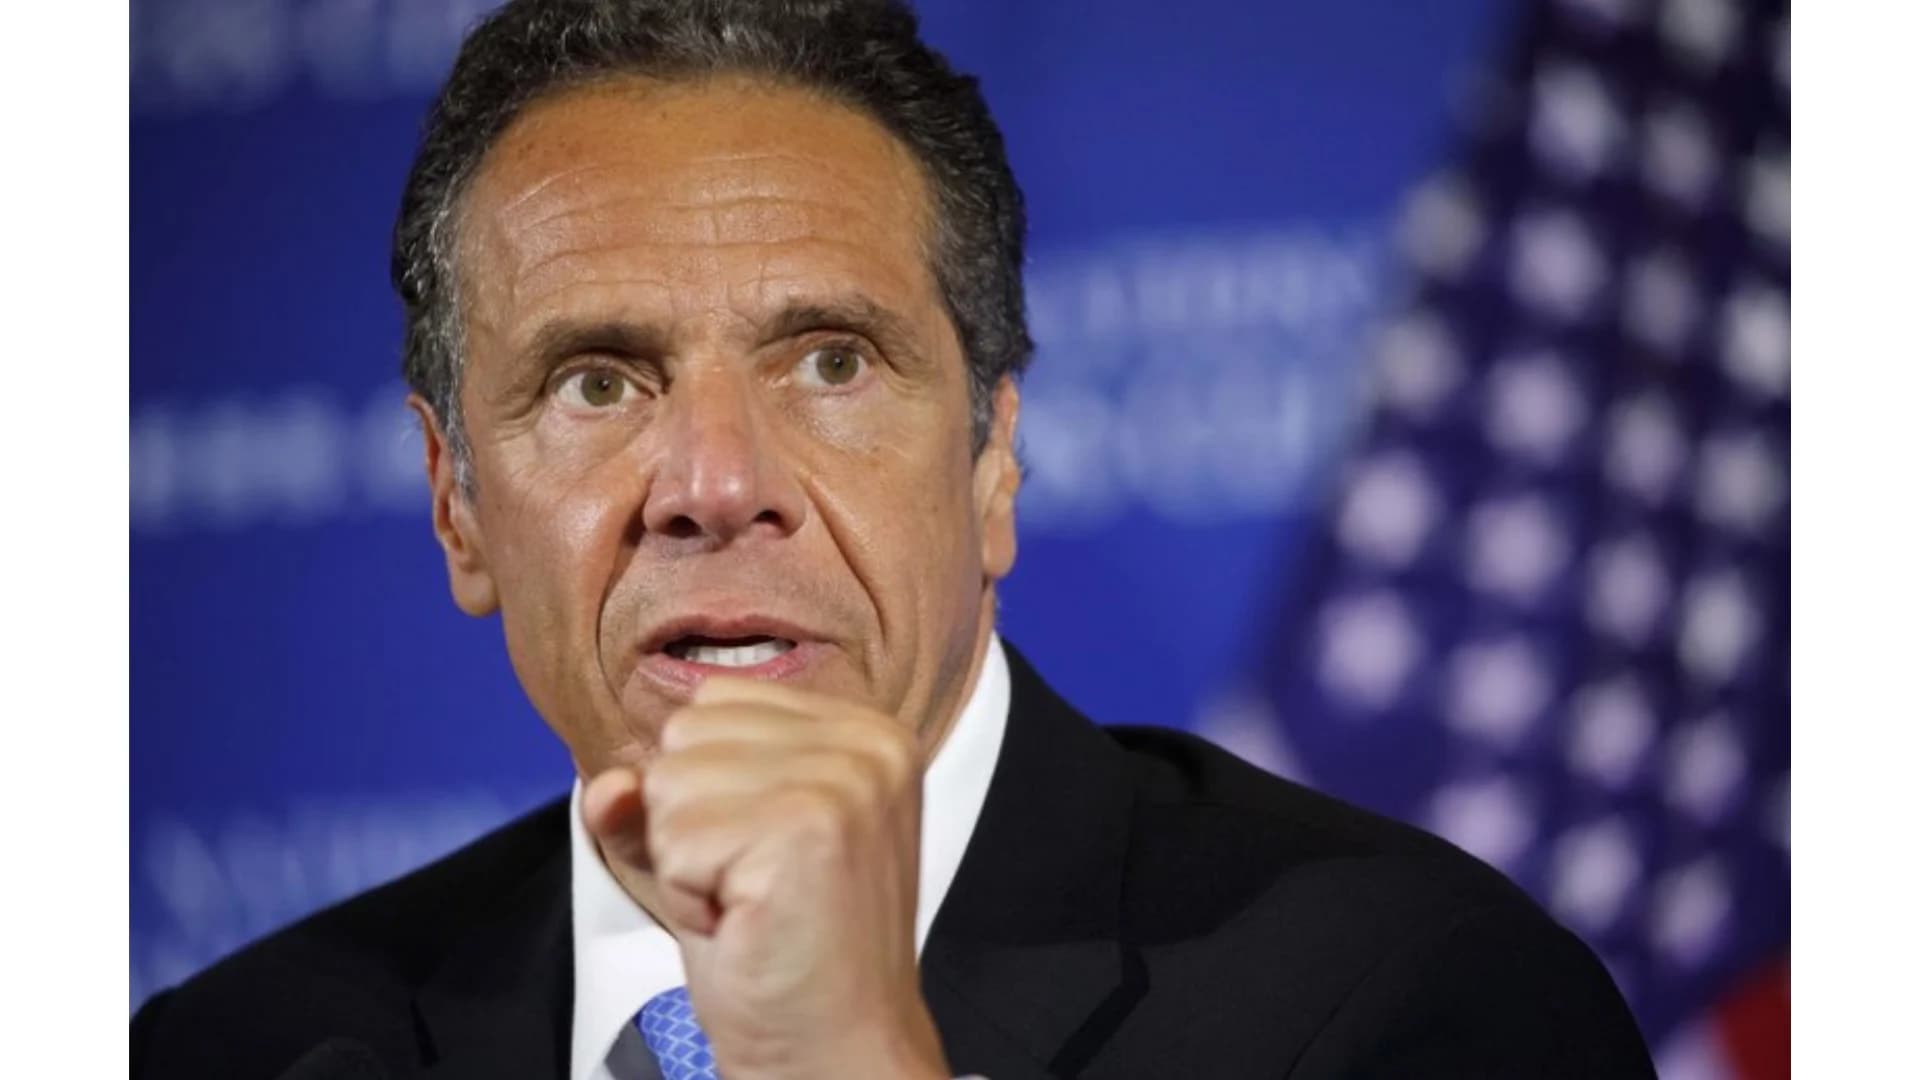 Cuomo denies former aide’s sexual harassment allegations